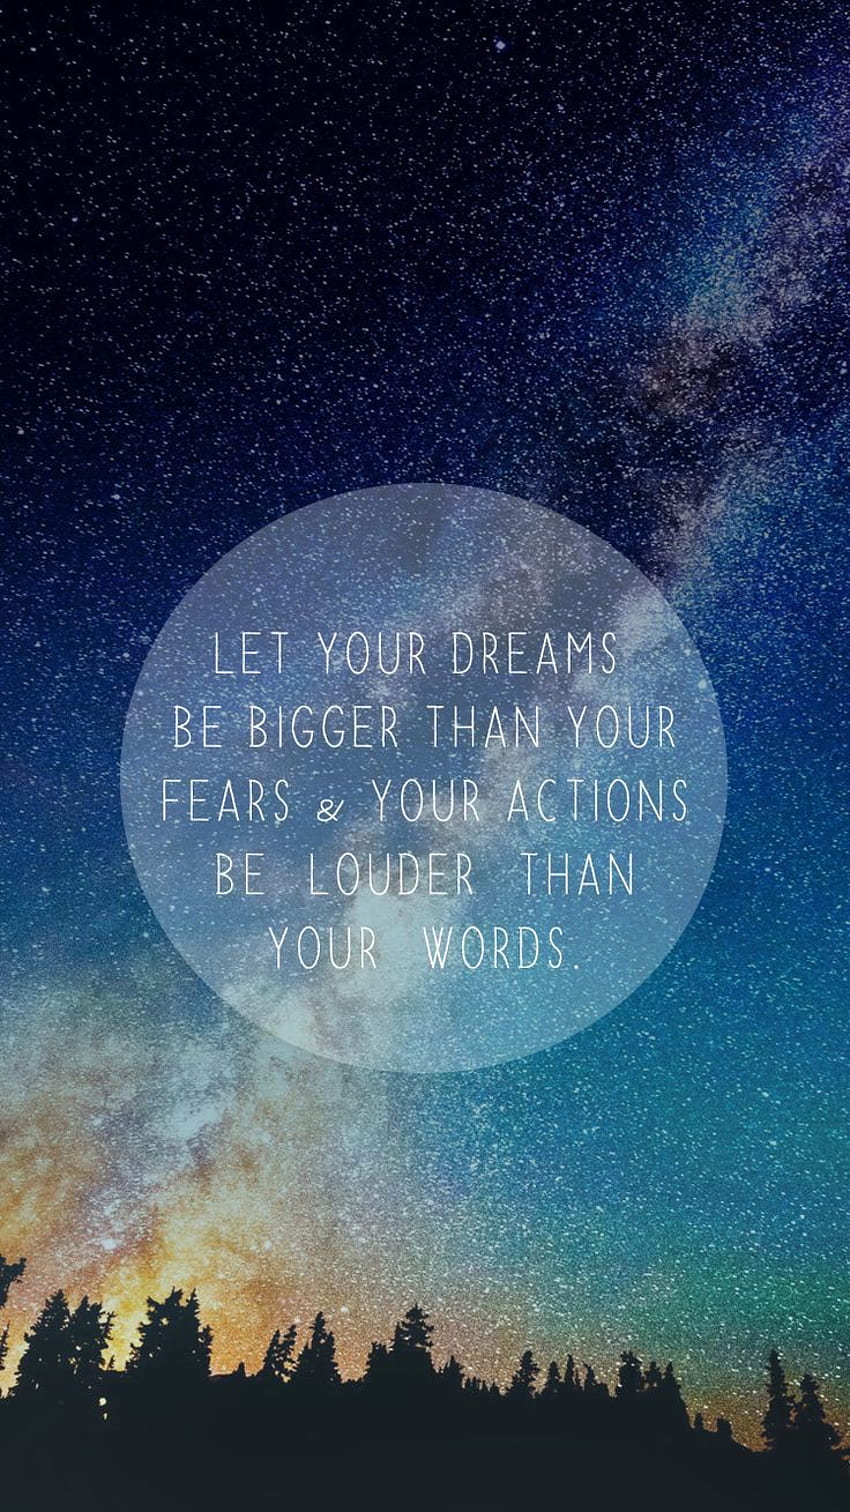 1366X768Px, 720P Free Download | Motivational Quotes Screensaver